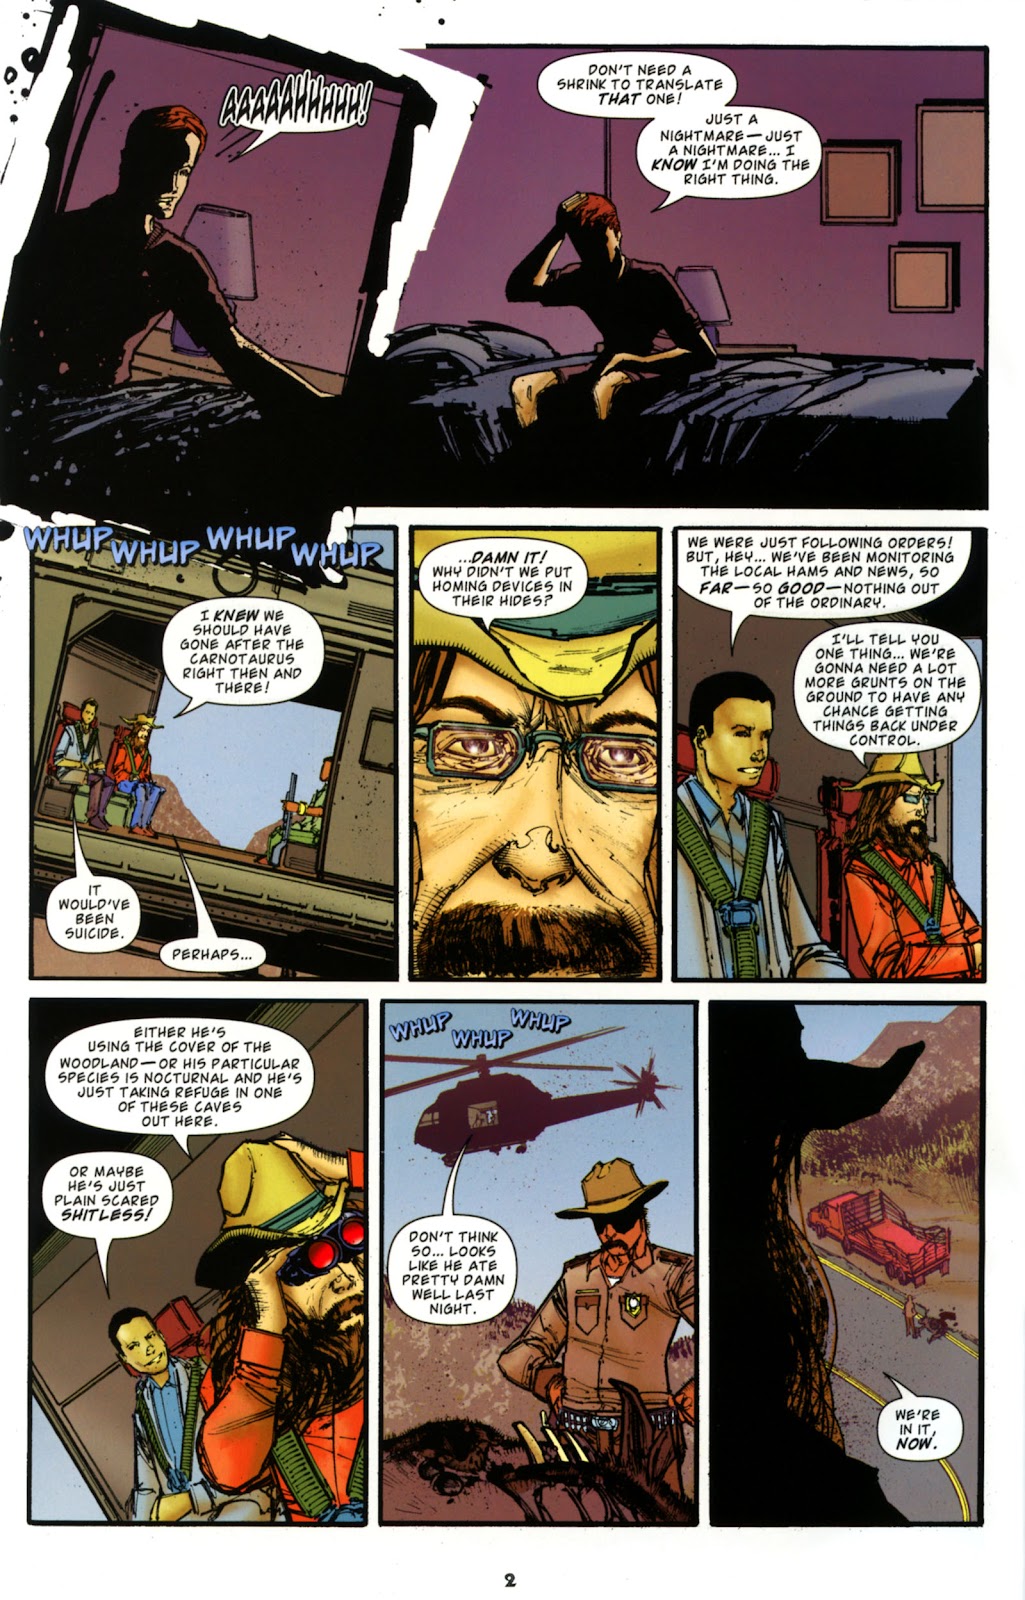 Jurassic Park (2010) issue 2 - Page 4